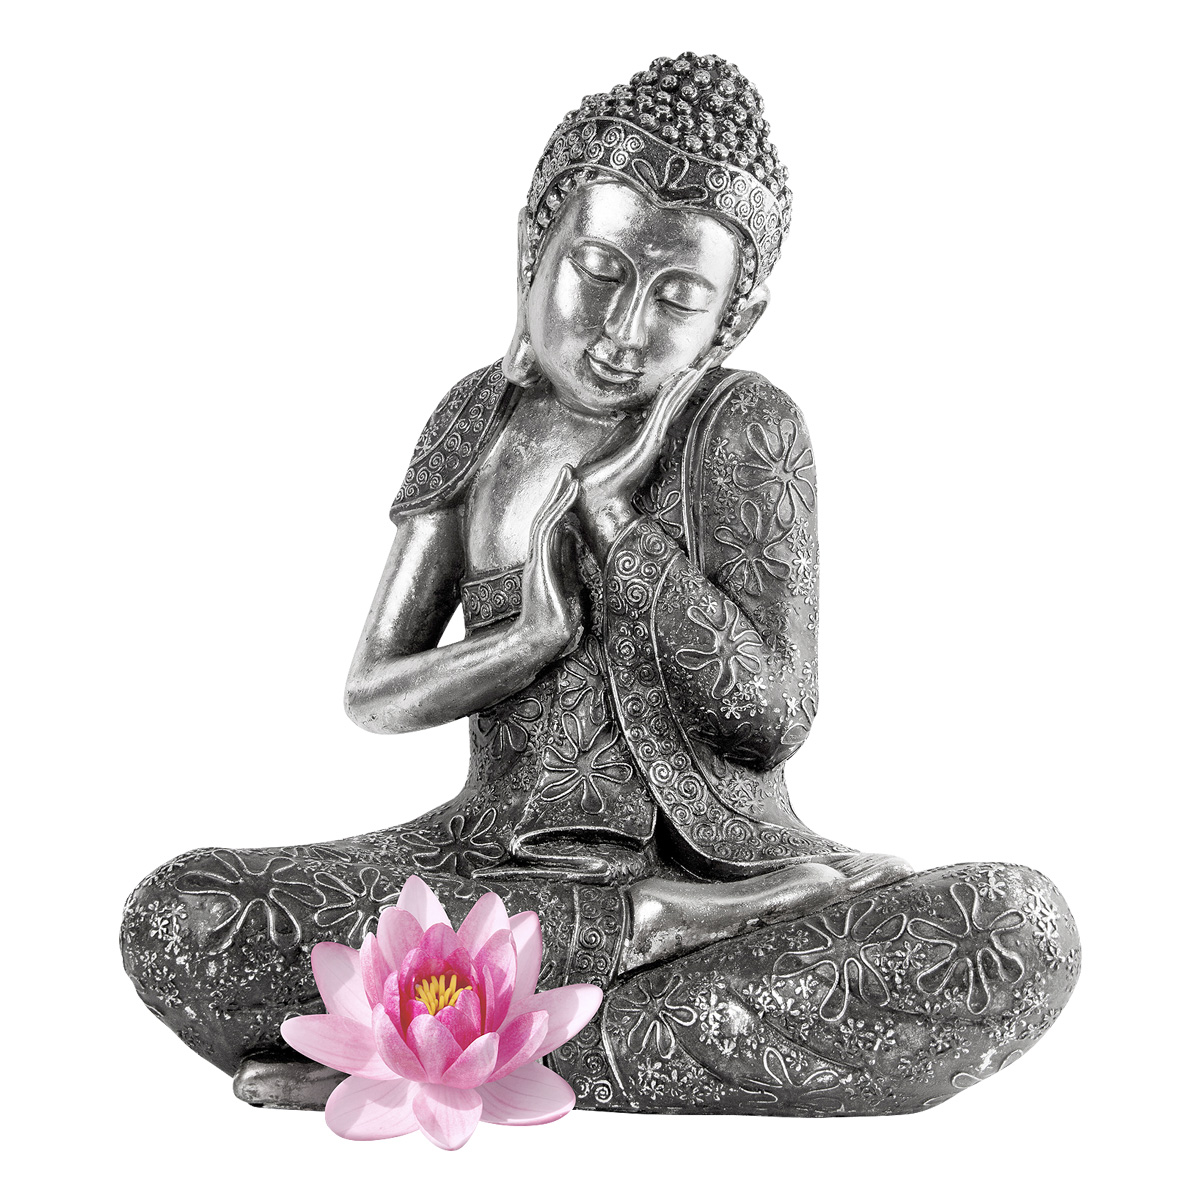 Wall Decals Zen Wall Decal Buddha And Lotus Ambiance Sticker Com